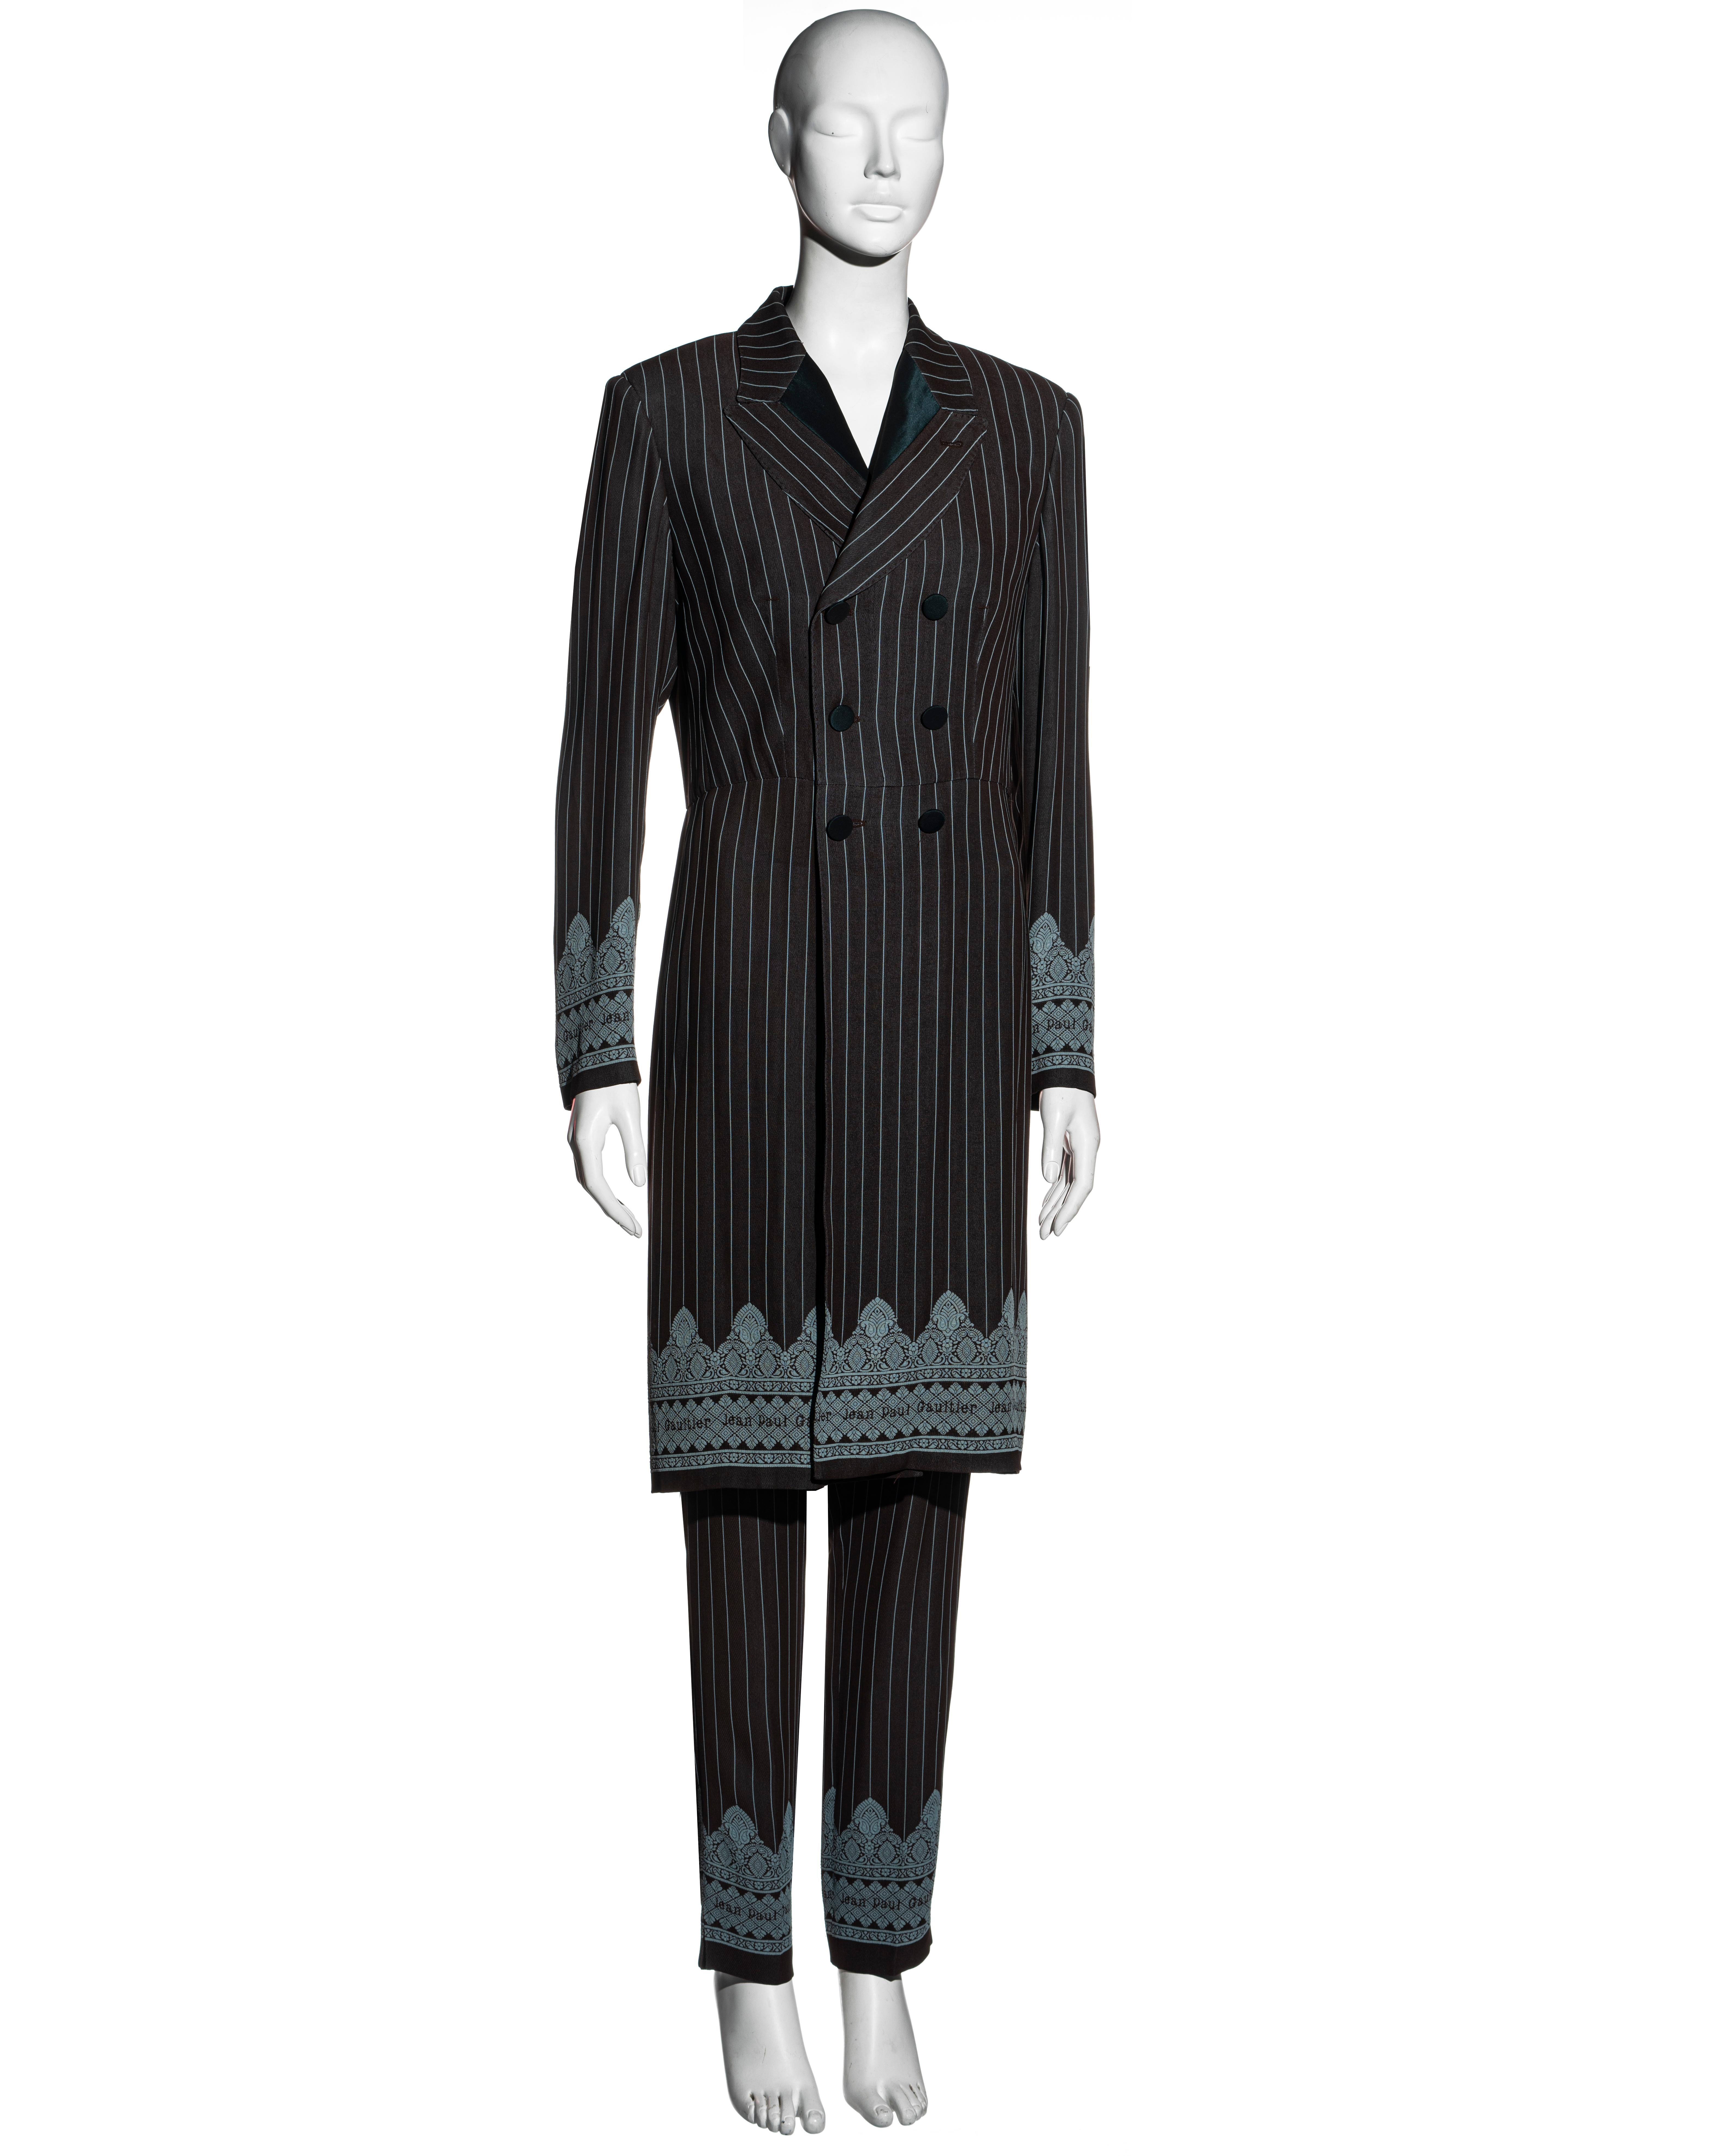 ▪ Jean Paul Gaultier brown and blue pinstripe pant suit
▪ Long double-breasted blazer jacket 
▪ Straight-leg pants 
▪ Black silk collar and buttons 
▪ Blue pattern at the cuffs and hemlines 
▪ IT 44 - FR 40 - UK 12
▪ Spring-Summer 1997